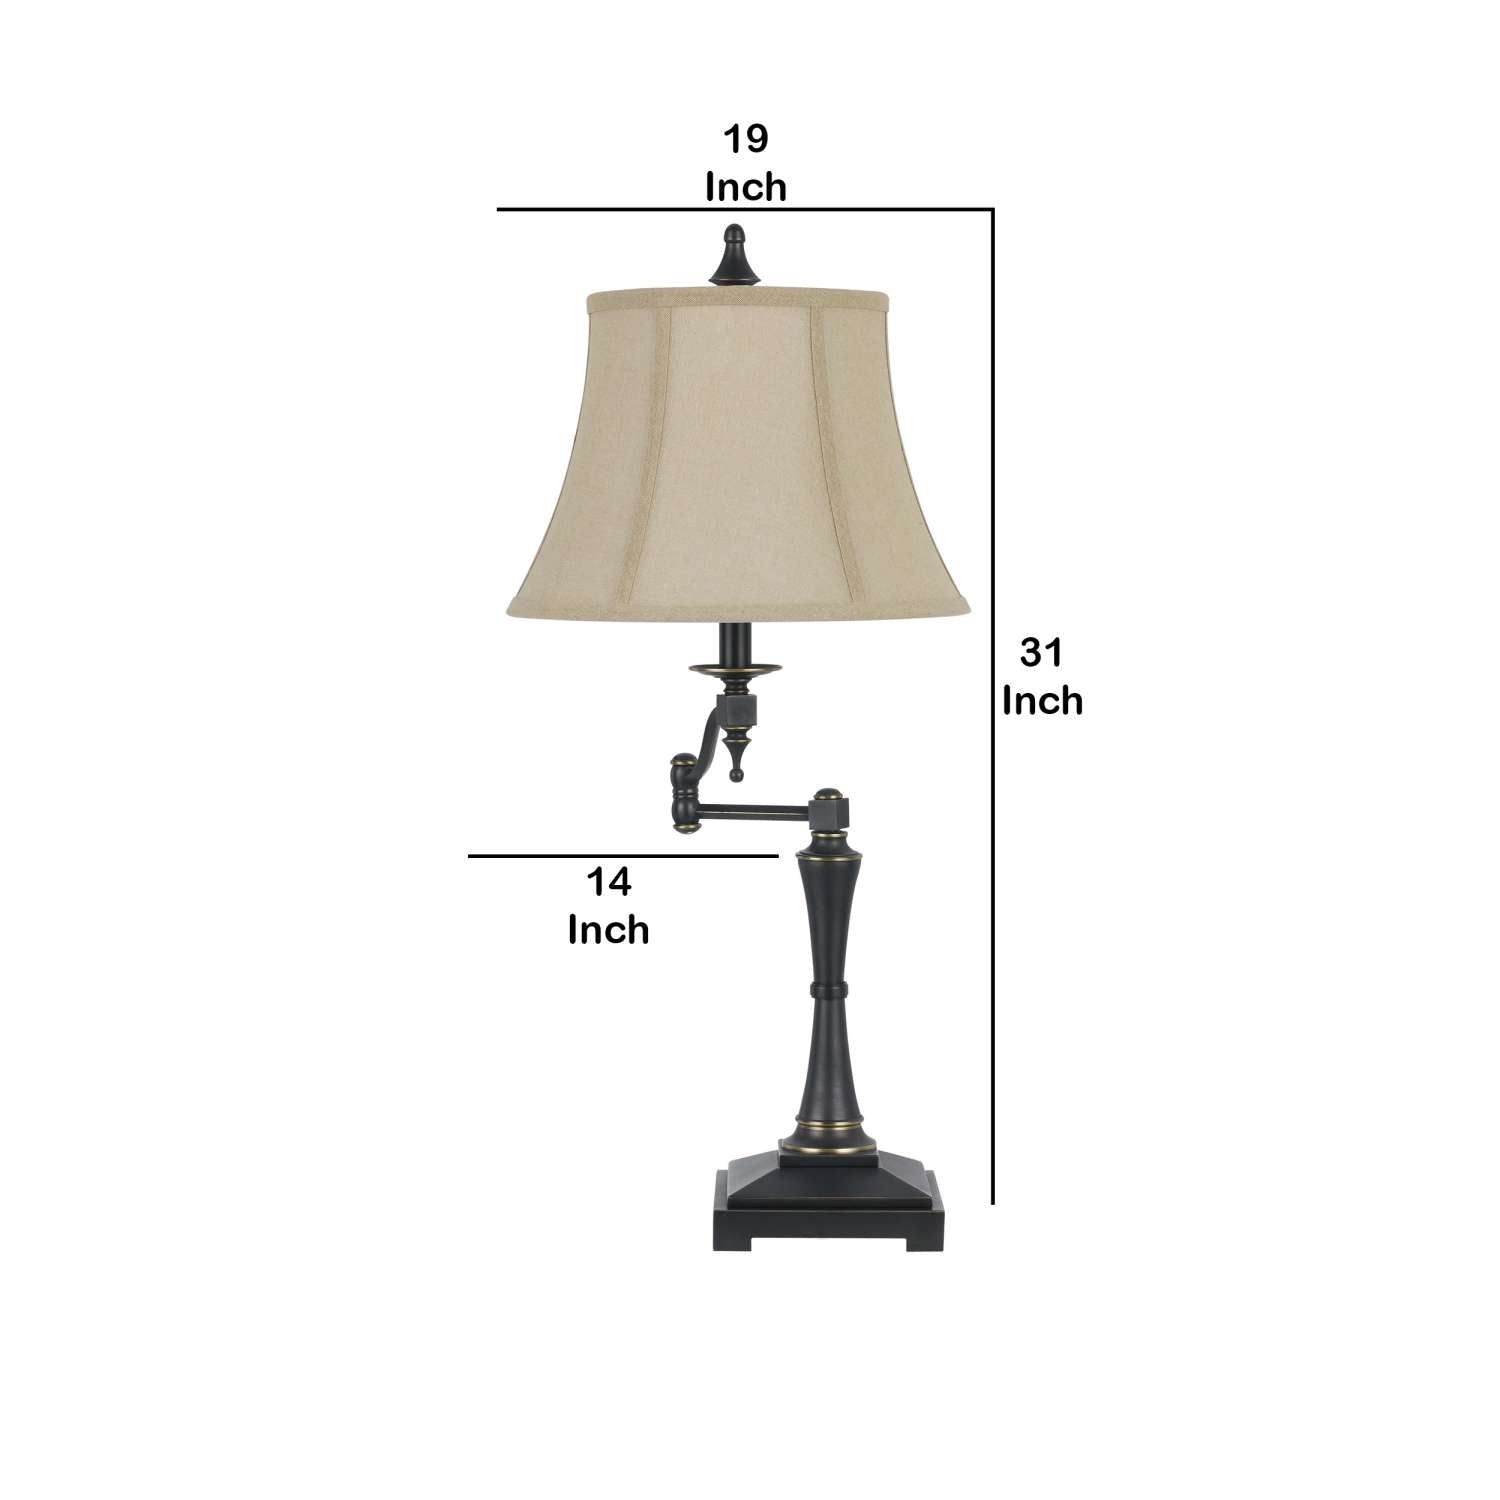 Metal Body Table Lamp With Fabric Tapered Bell Shade, Black And Beige By Benzara